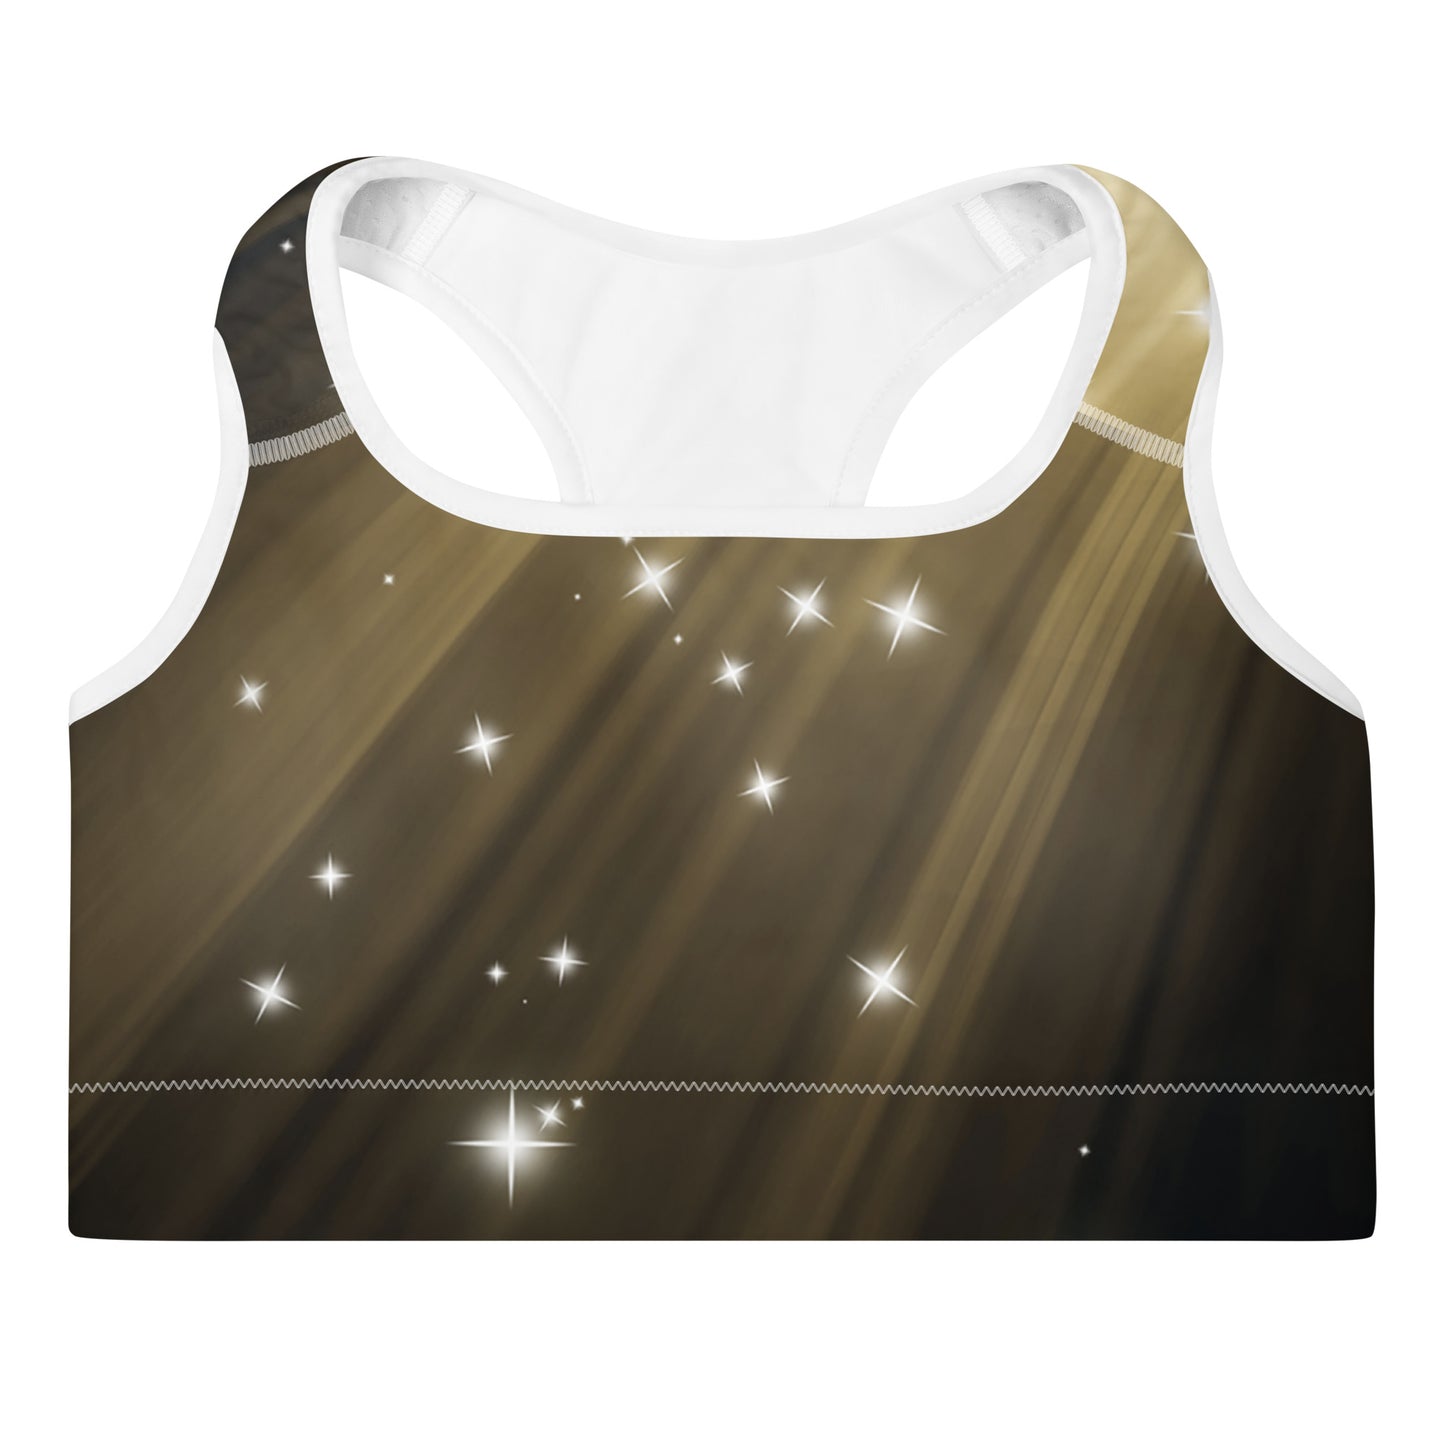 Ready to shine? Embrace the artistry within you with the Gold Spotlyght Padded Sports Bra. 🌟💪"